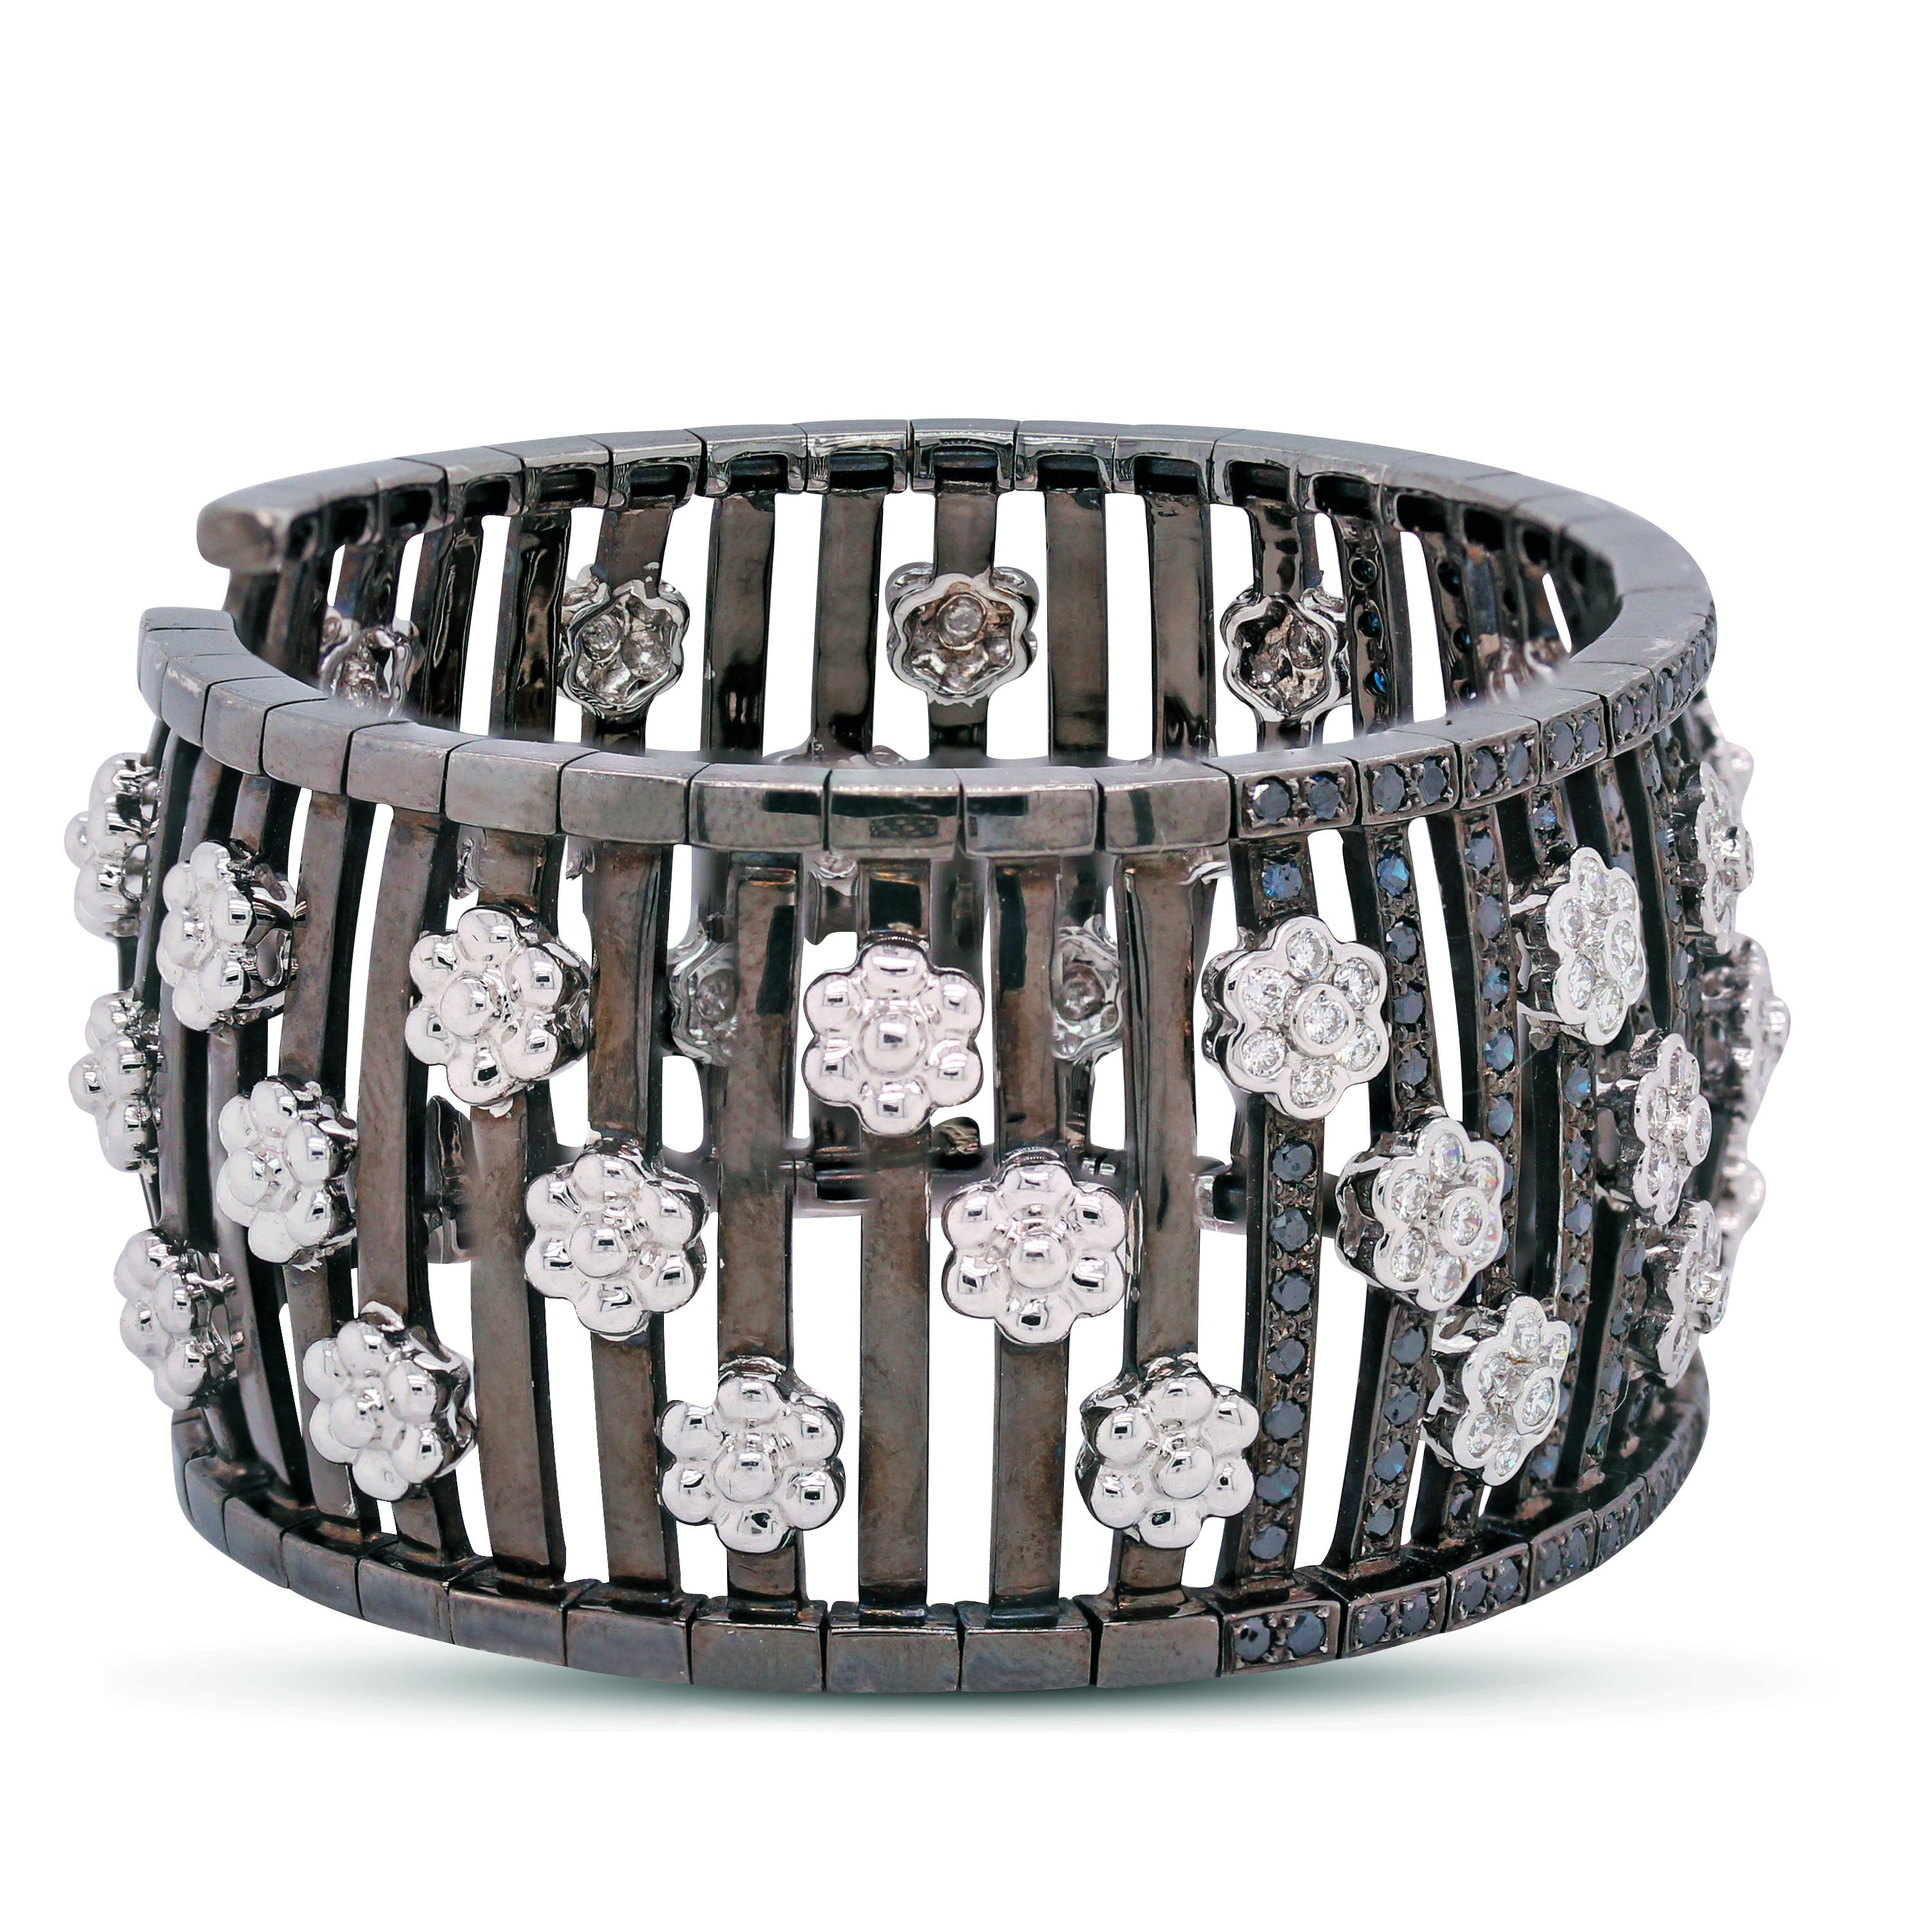 18K Black and White Gold Cuff Bracelet with Black and White Diamonds

This one-of-a-kind bracelet features diamond clusters set in white gold and black diamonds set in black gold

Diamond flower clusters are set throughout the piece.

1.50 carat G